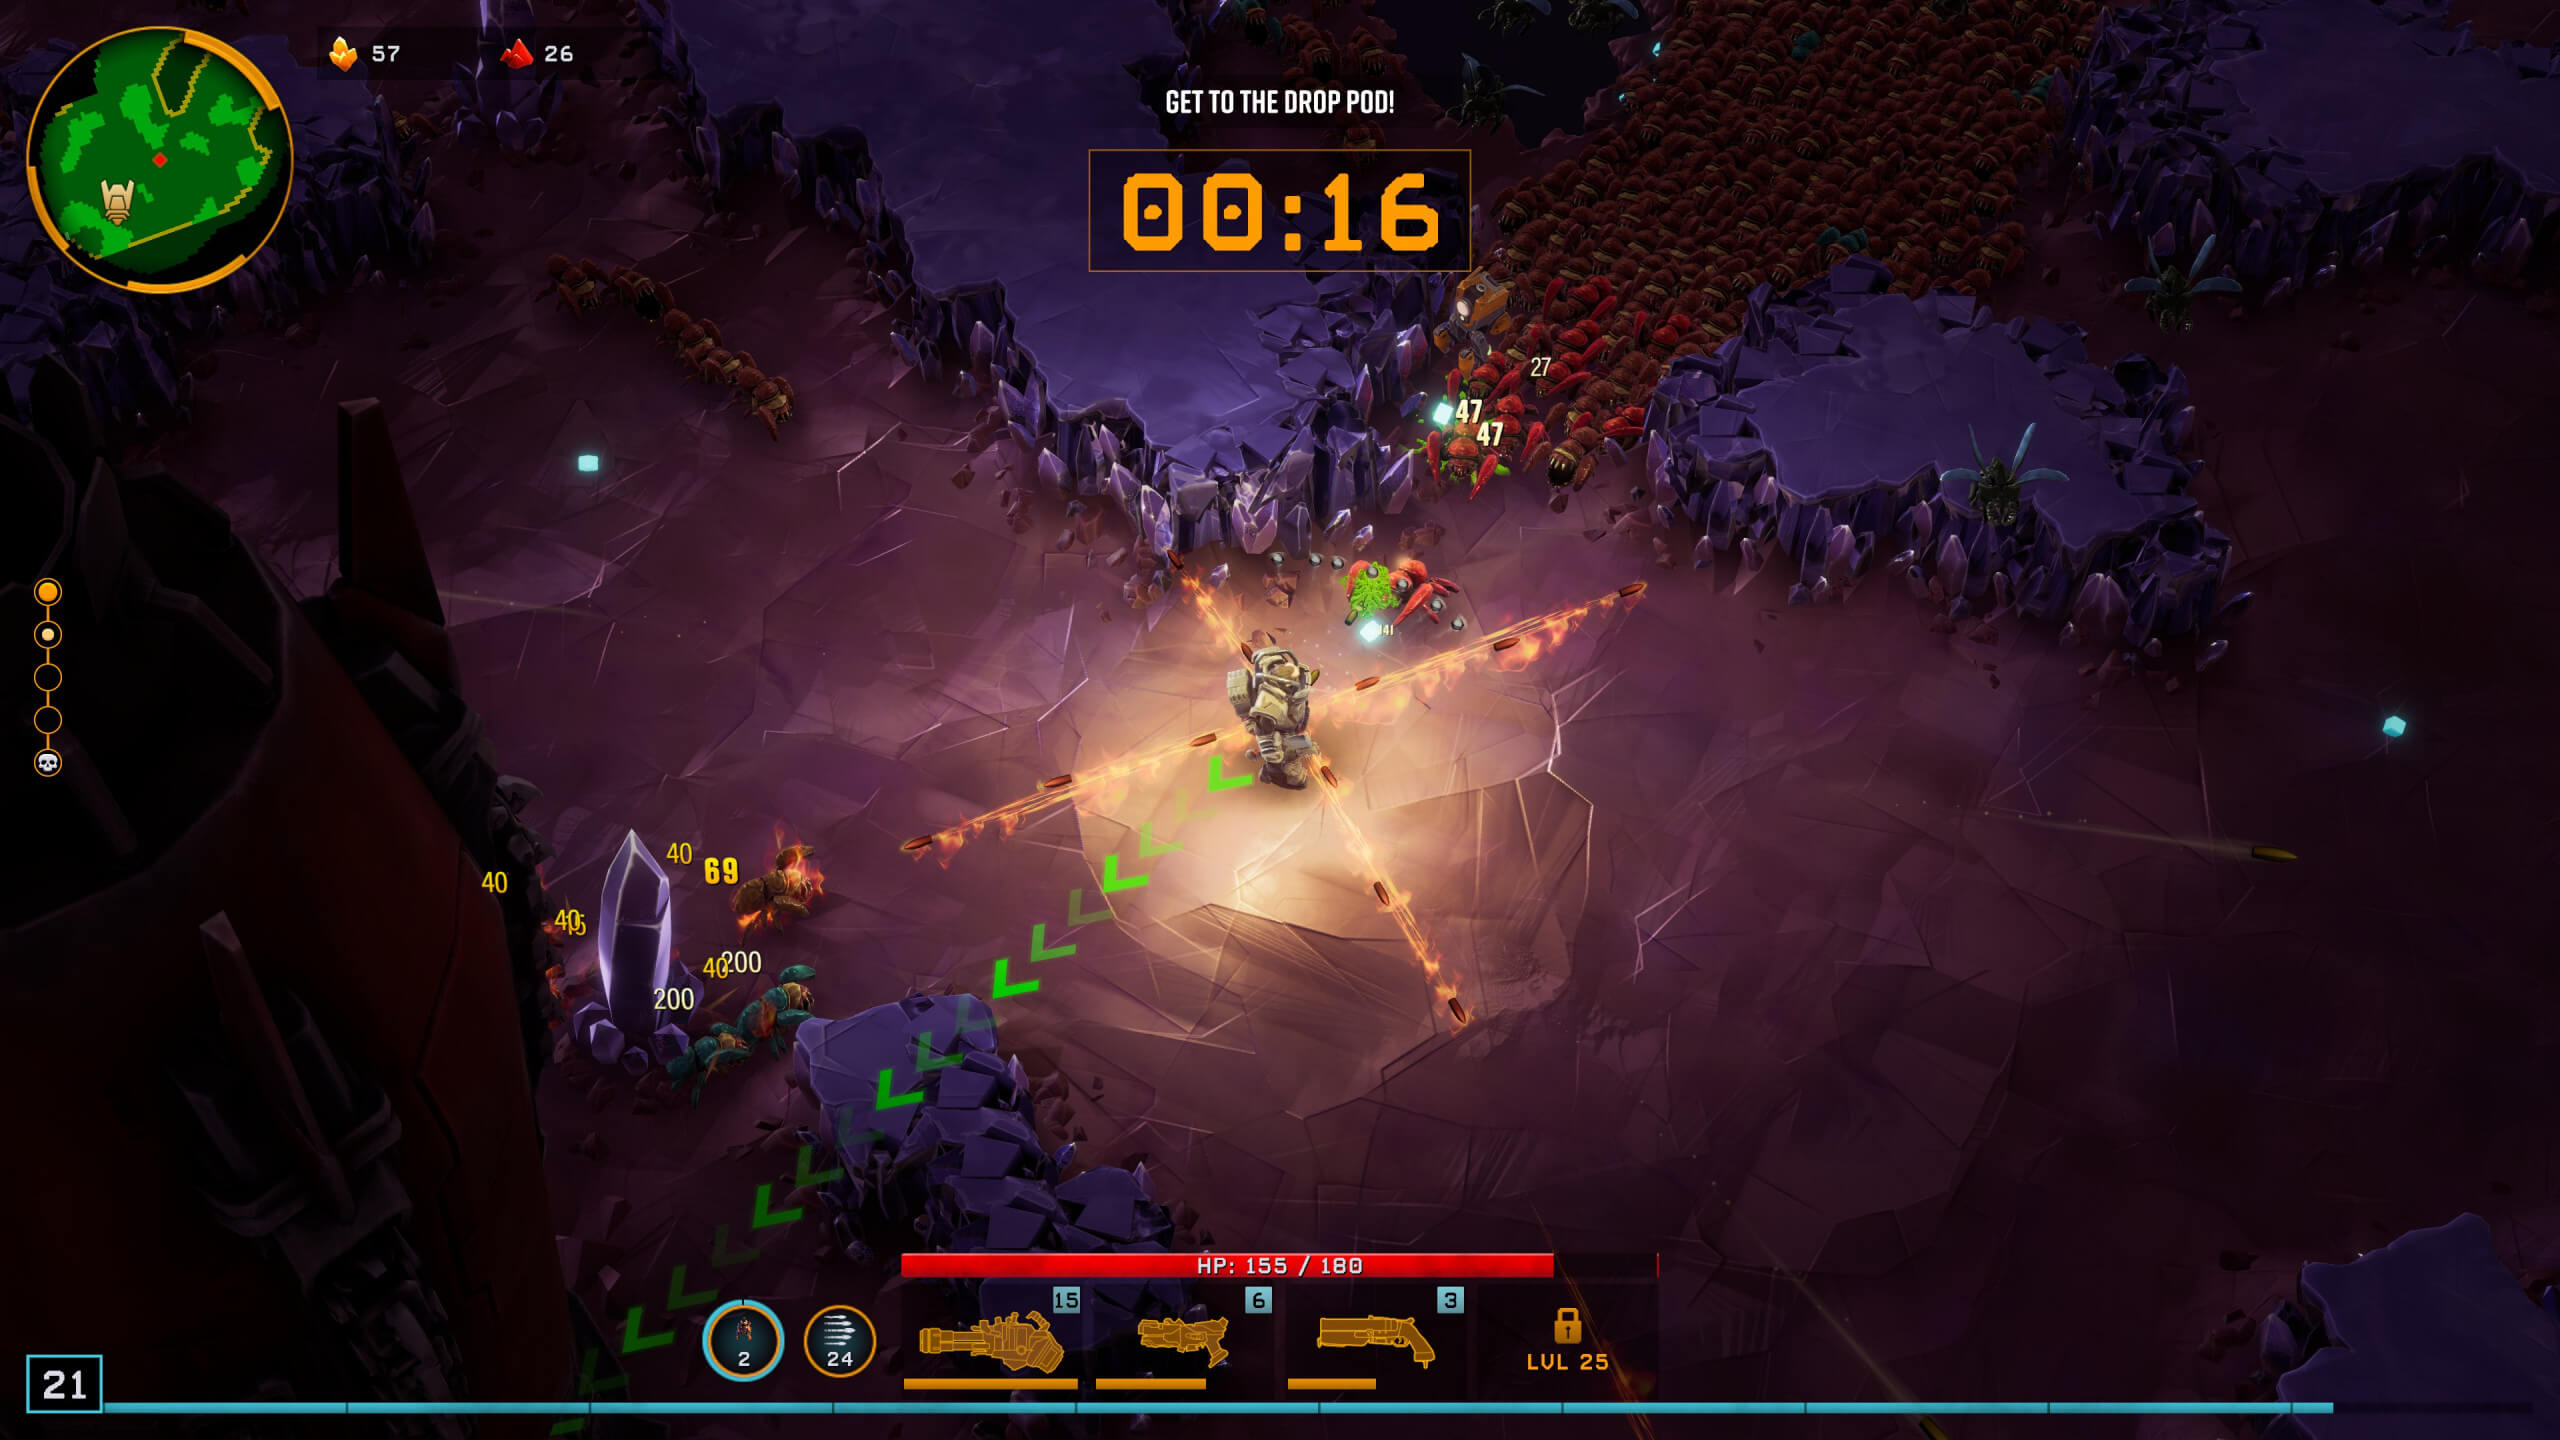 The gameplay is shown as the player character, while shooting flames out in four directions, attempts to make it to the drop pod in time to leave. A timer is shown at the top of the screen with 16 remaining seconds. Green arrows along the ground point the way to it. A very large group of many, many bugs trails close behind in the upper right area of the screen.